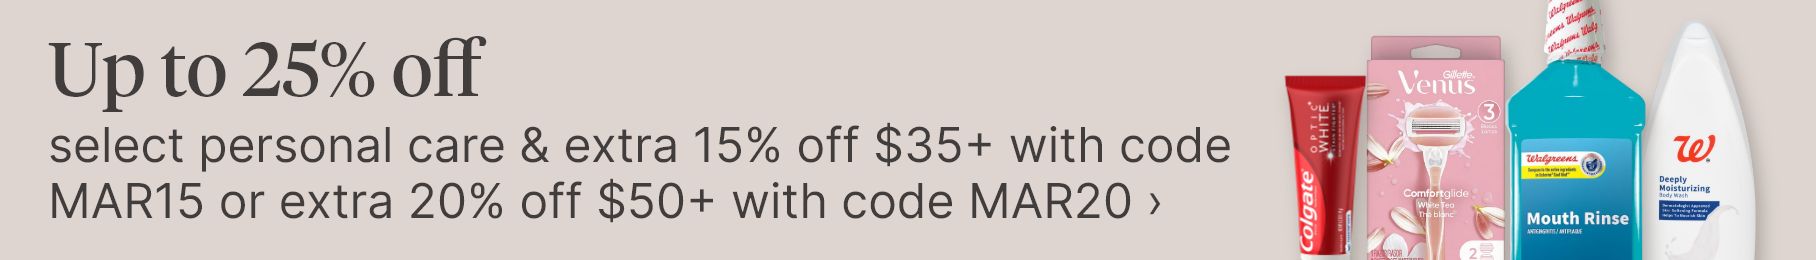 Up to 25% off select personal care & extra 15% off $35+ with code MAR15 or extra 20% off $50+ with code MAR20.